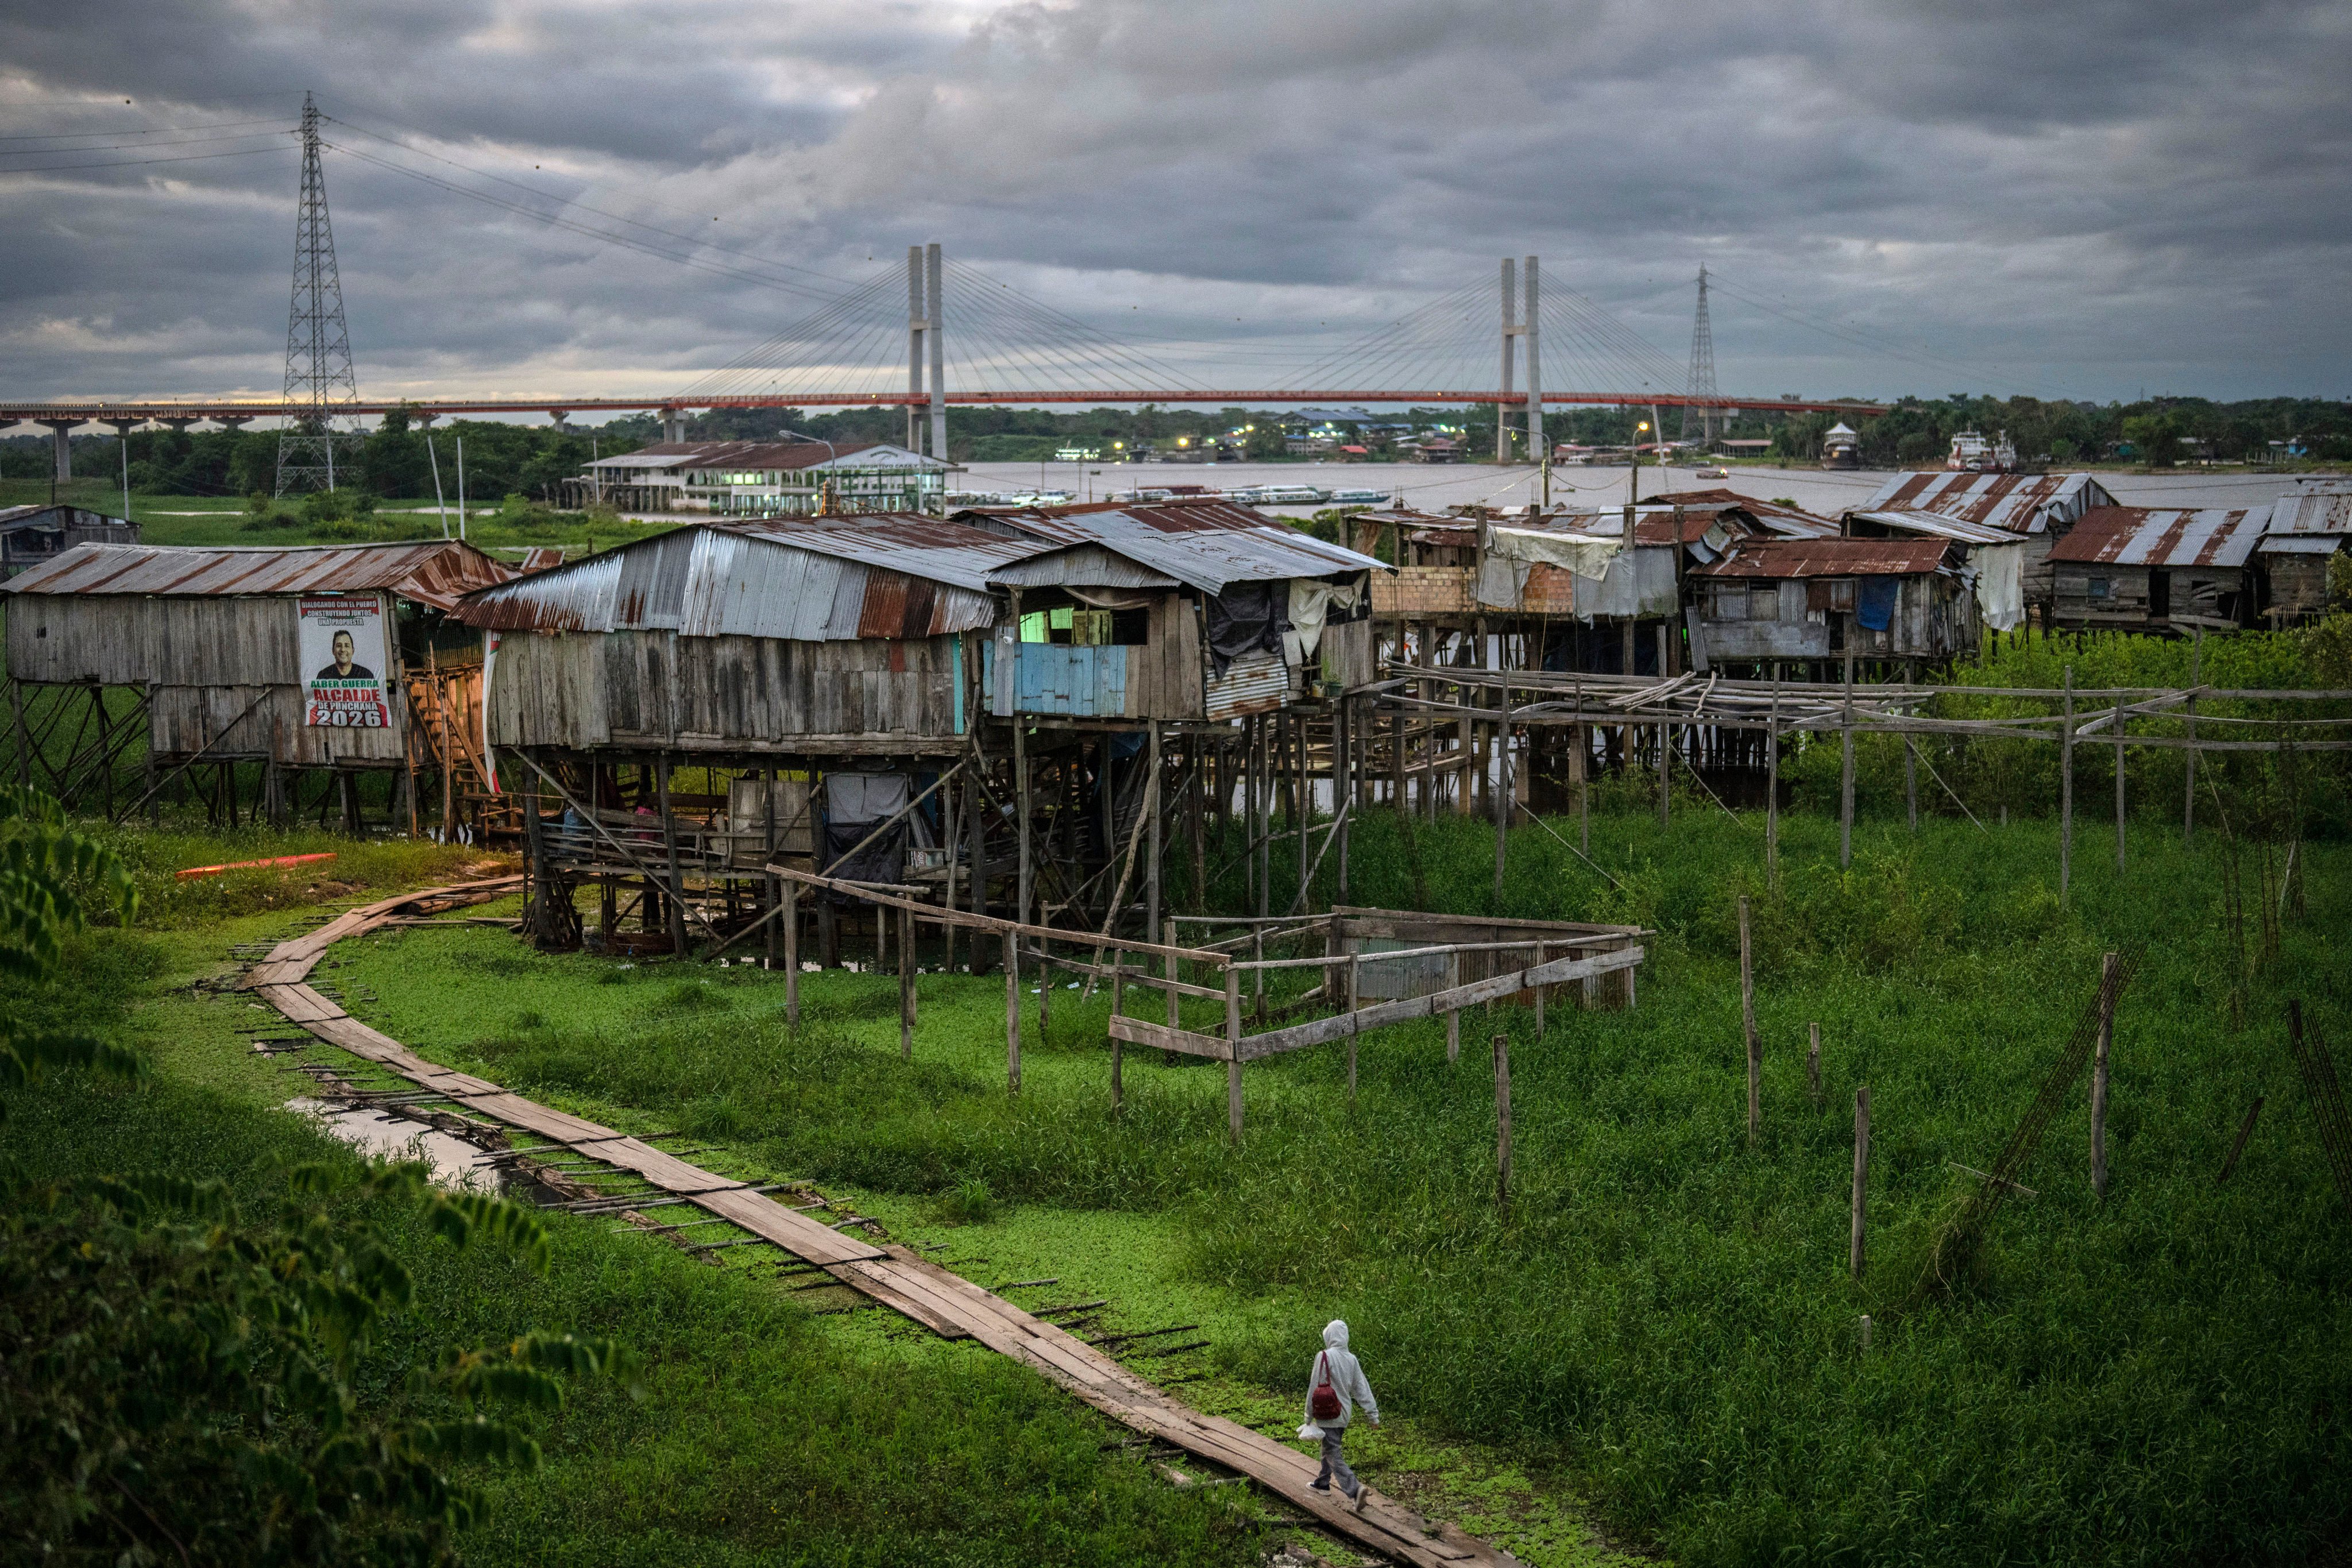 A highway bridge (in background) that is part of a federal highway project, extends across the Nanay River as a resident walks along a boarded path in the Punchana district of Iquitos, Peru. Photo: AP